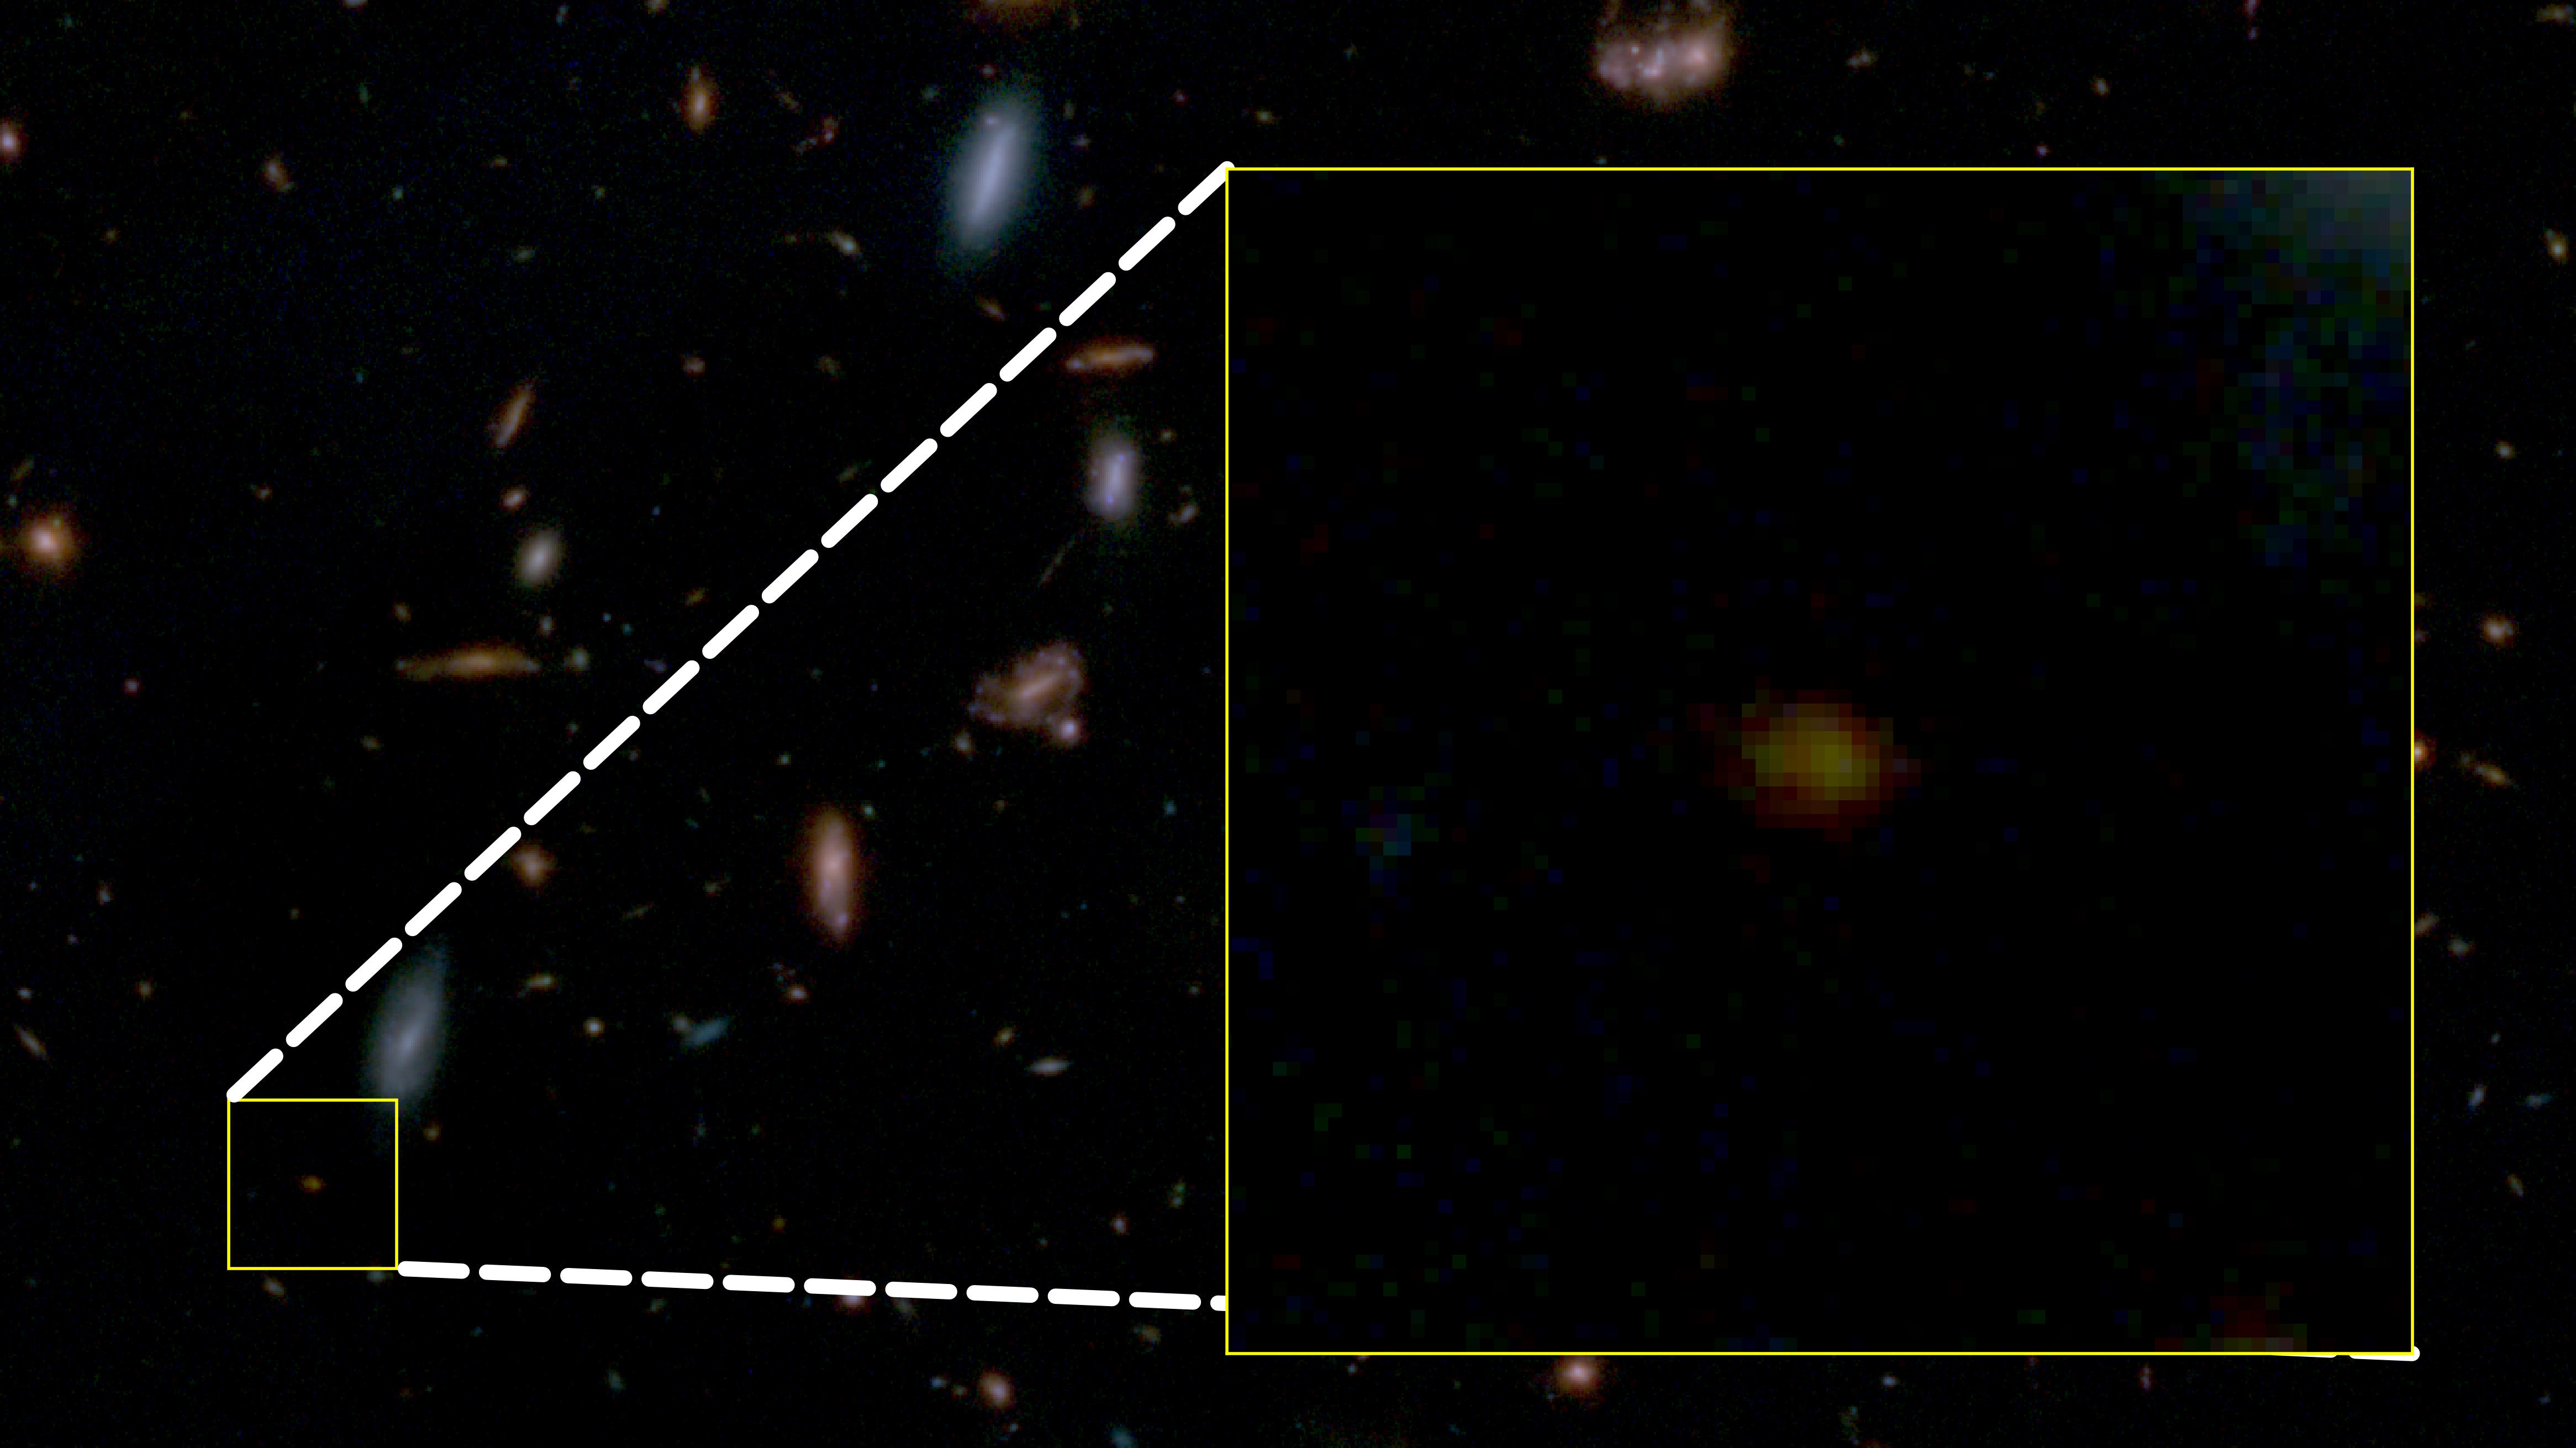 An image of a dead galaxy with a square in the middle taken by JWST.